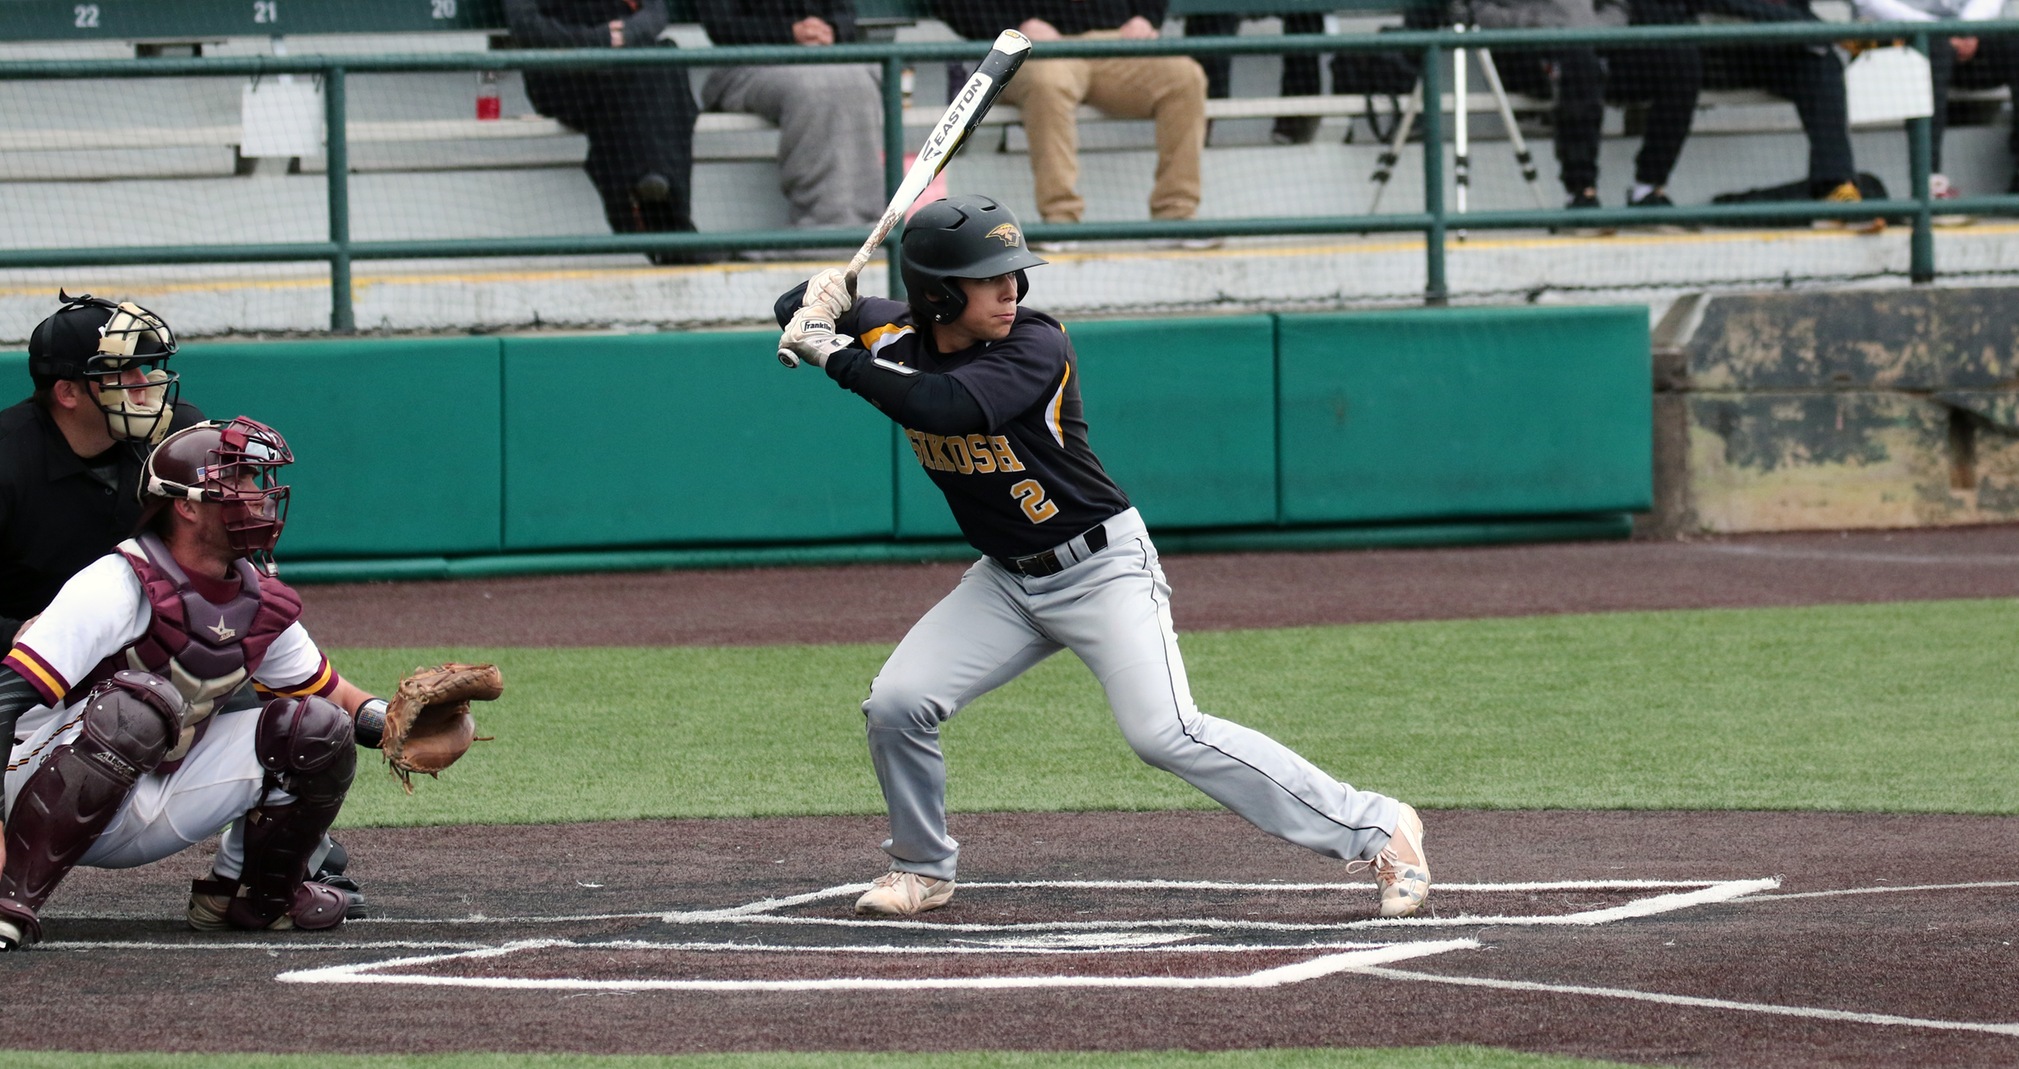 Dylan Ott had two hits and drove in runs during the first, fifth and seventh innings.